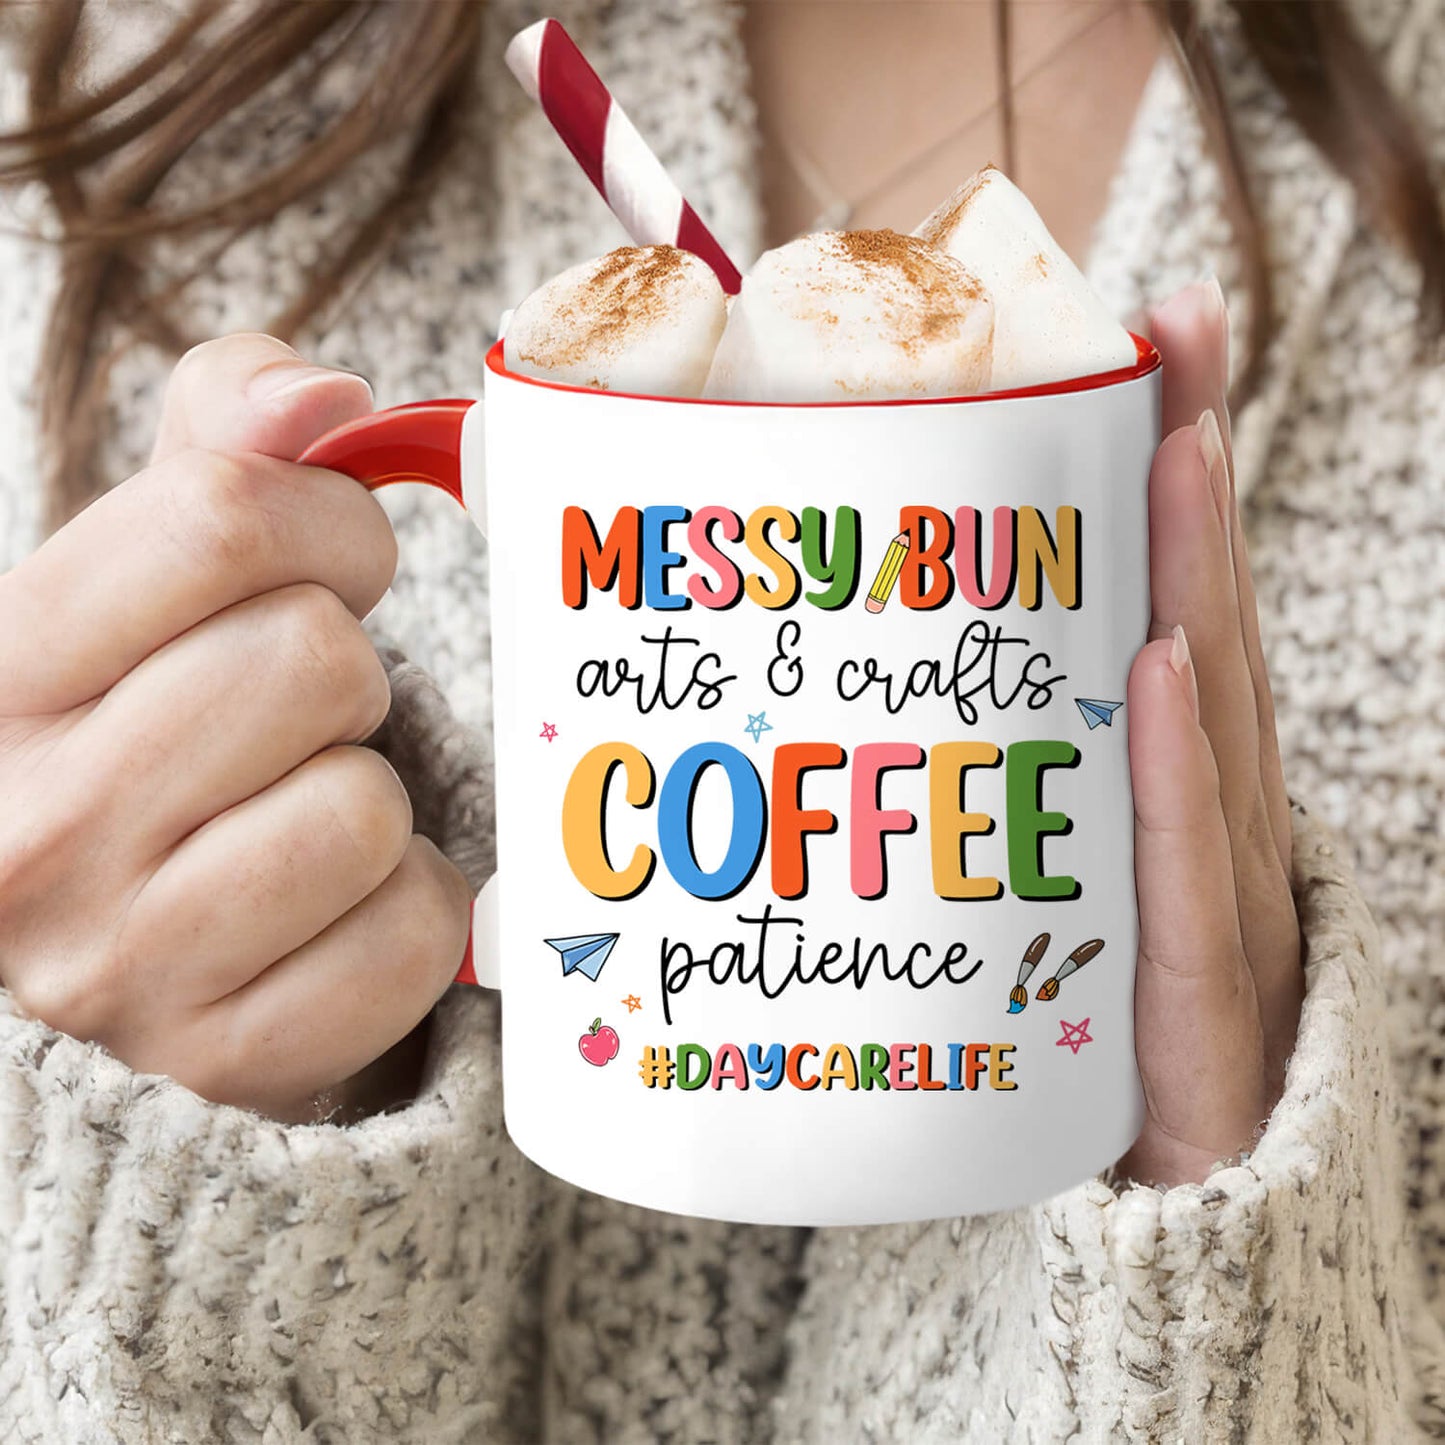 Messy Bun - Personalized Birthday or Christmas gift For Daycare Teacher - Custom Accent Mug - MyMindfulGifts